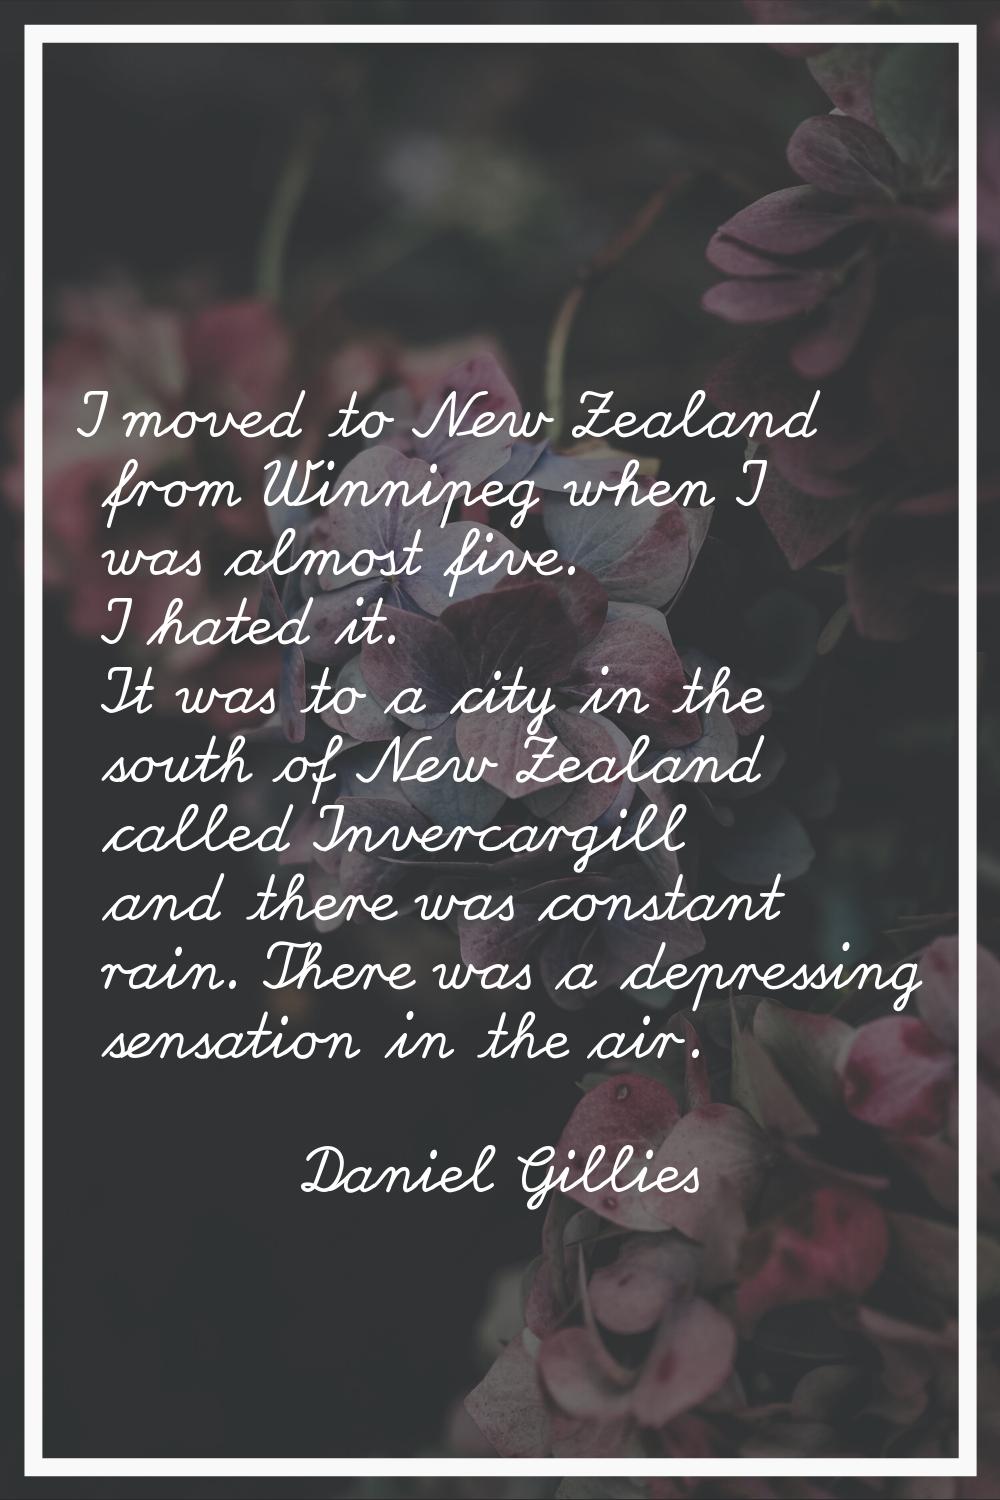 I moved to New Zealand from Winnipeg when I was almost five. I hated it. It was to a city in the so